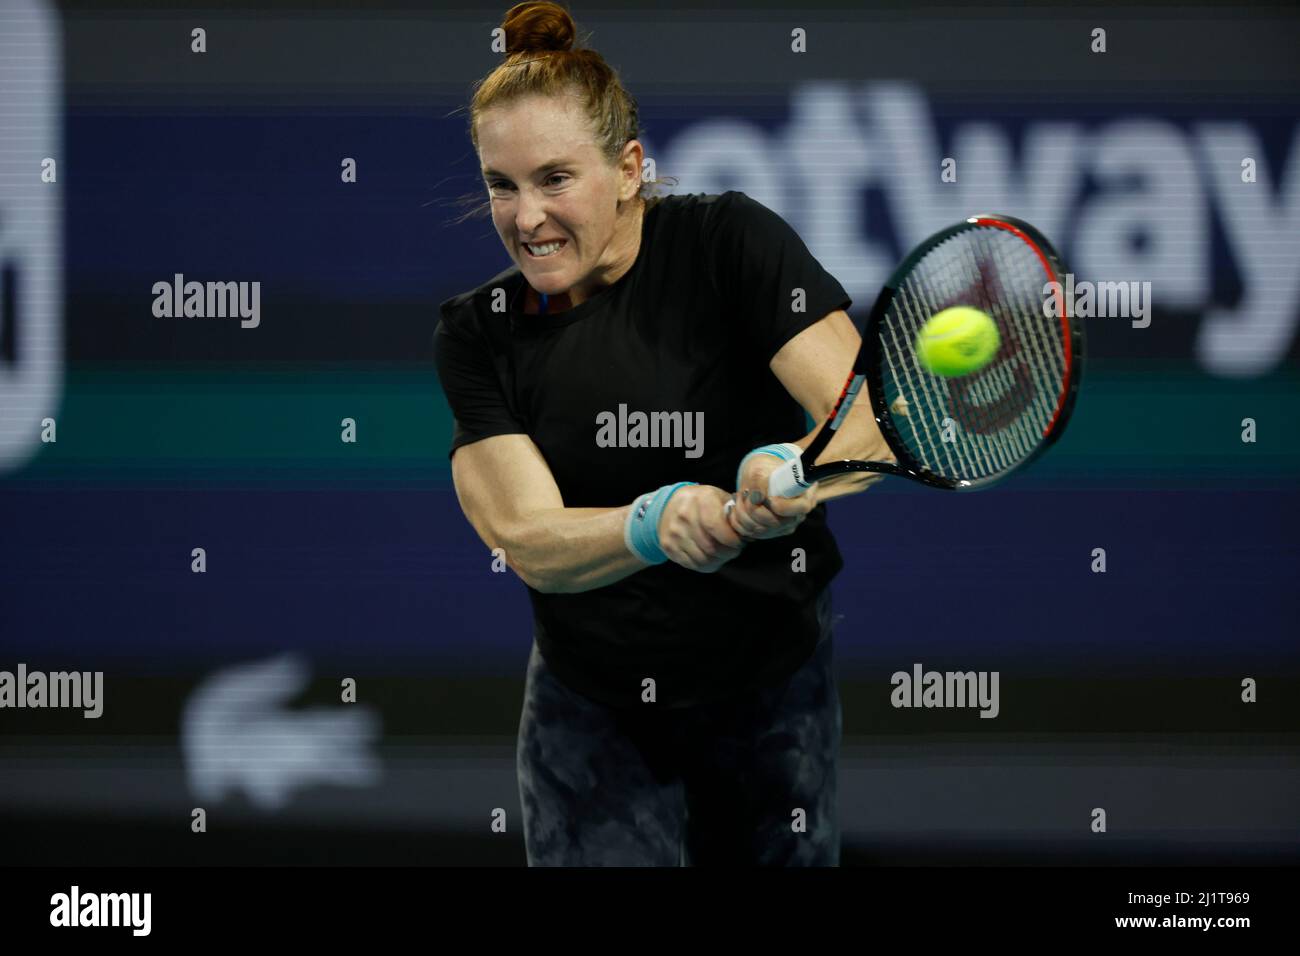 Miami Gardens, Florida, USA. 27th Mar, 2022. Iga Swiatek of Poland defeats Madison Brengle of United States during the 2022 Miami Open presented by Itaú at Hard Rock Stadium on March 27, 2022 in Miami Gardens, Florida People: Madison Brengle Credit: Hoo Me/Media Punch/Alamy Live News Stock Photo